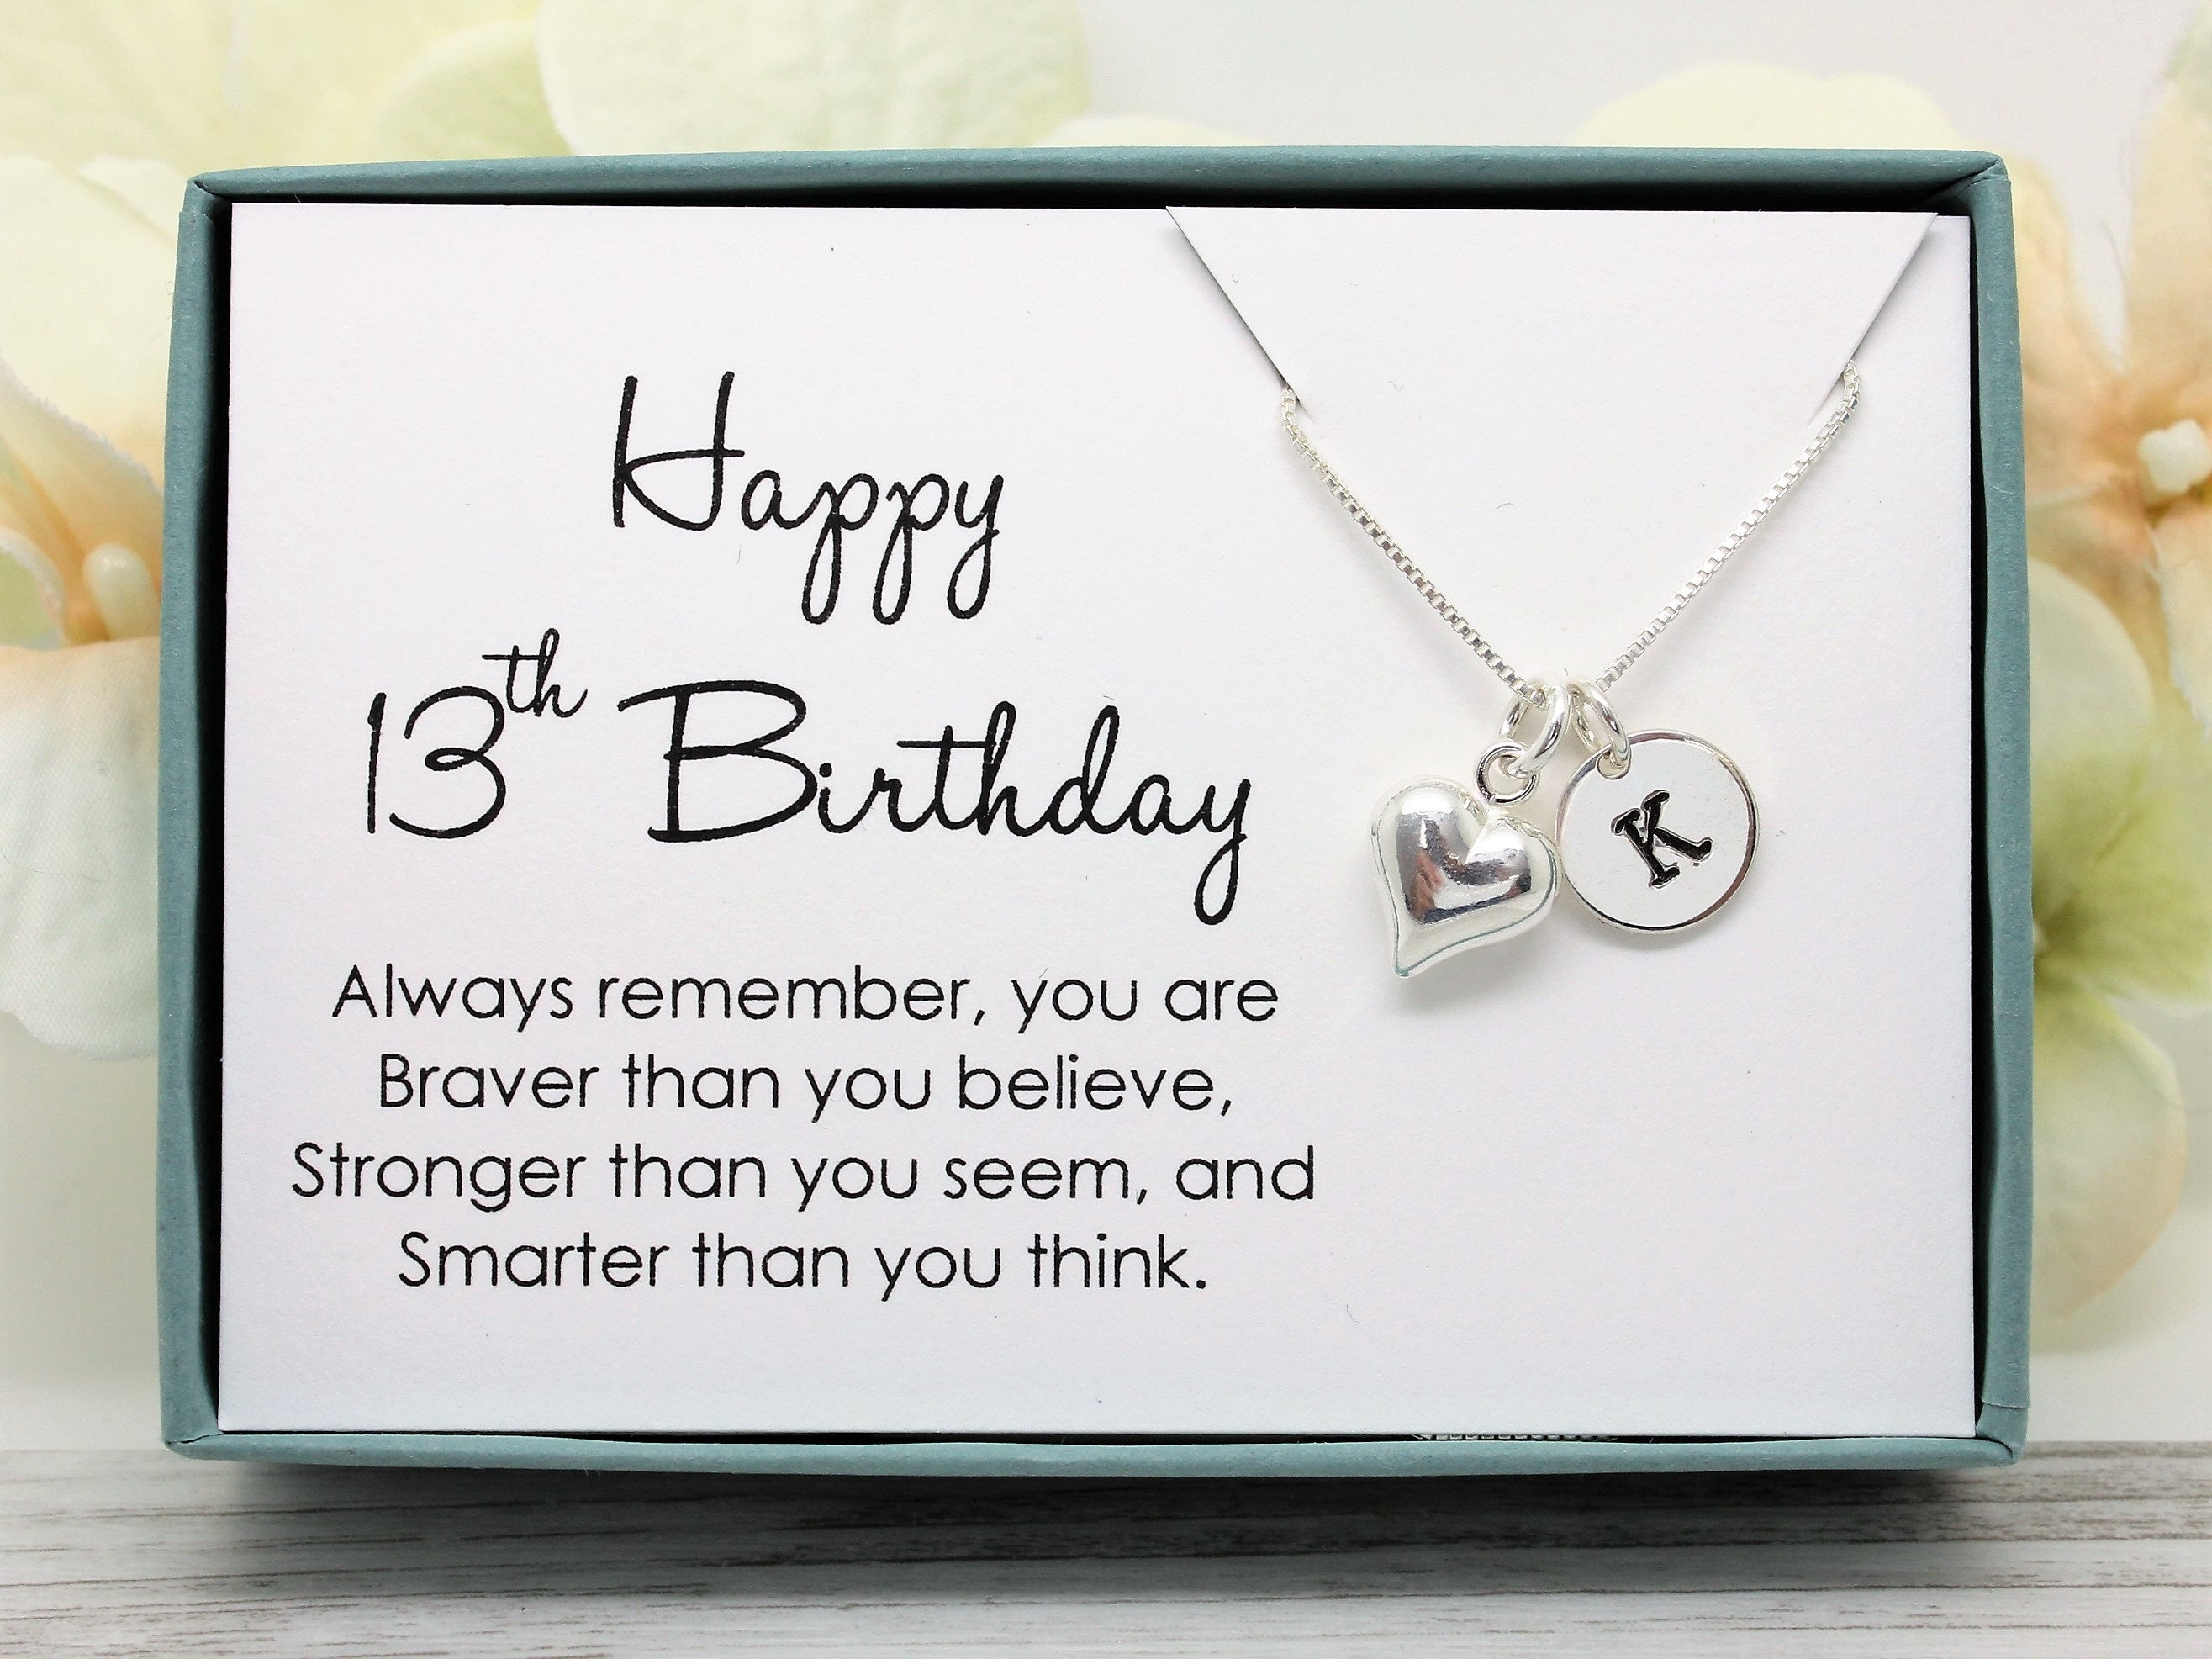 Buy 13th Birthday Gift Necklace: Birthday Gift, Jewelry Gift for Her 13th  Birthday Fire Snow Teardrop 925 Sterling Silver Jewelled Necklace Online in  India - Etsy